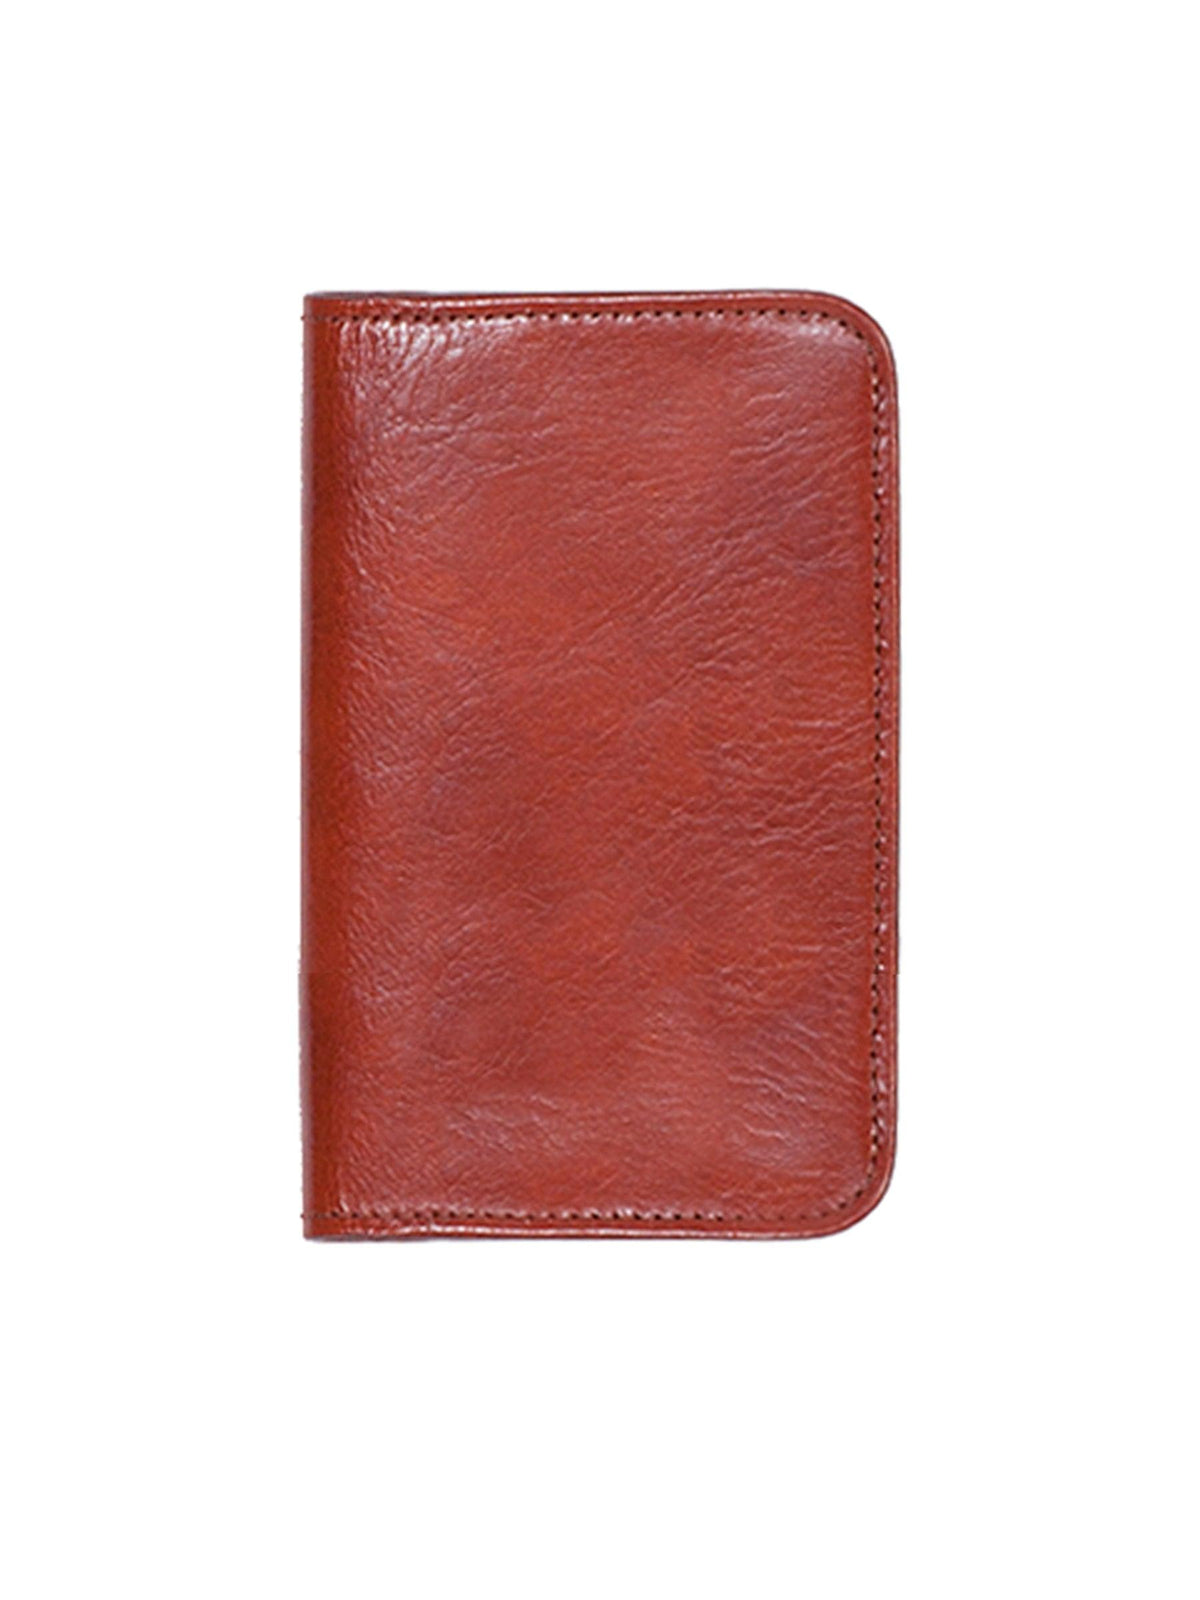 Scully Leather Cognac Italian Leather Personal Phone/Address - Flyclothing LLC